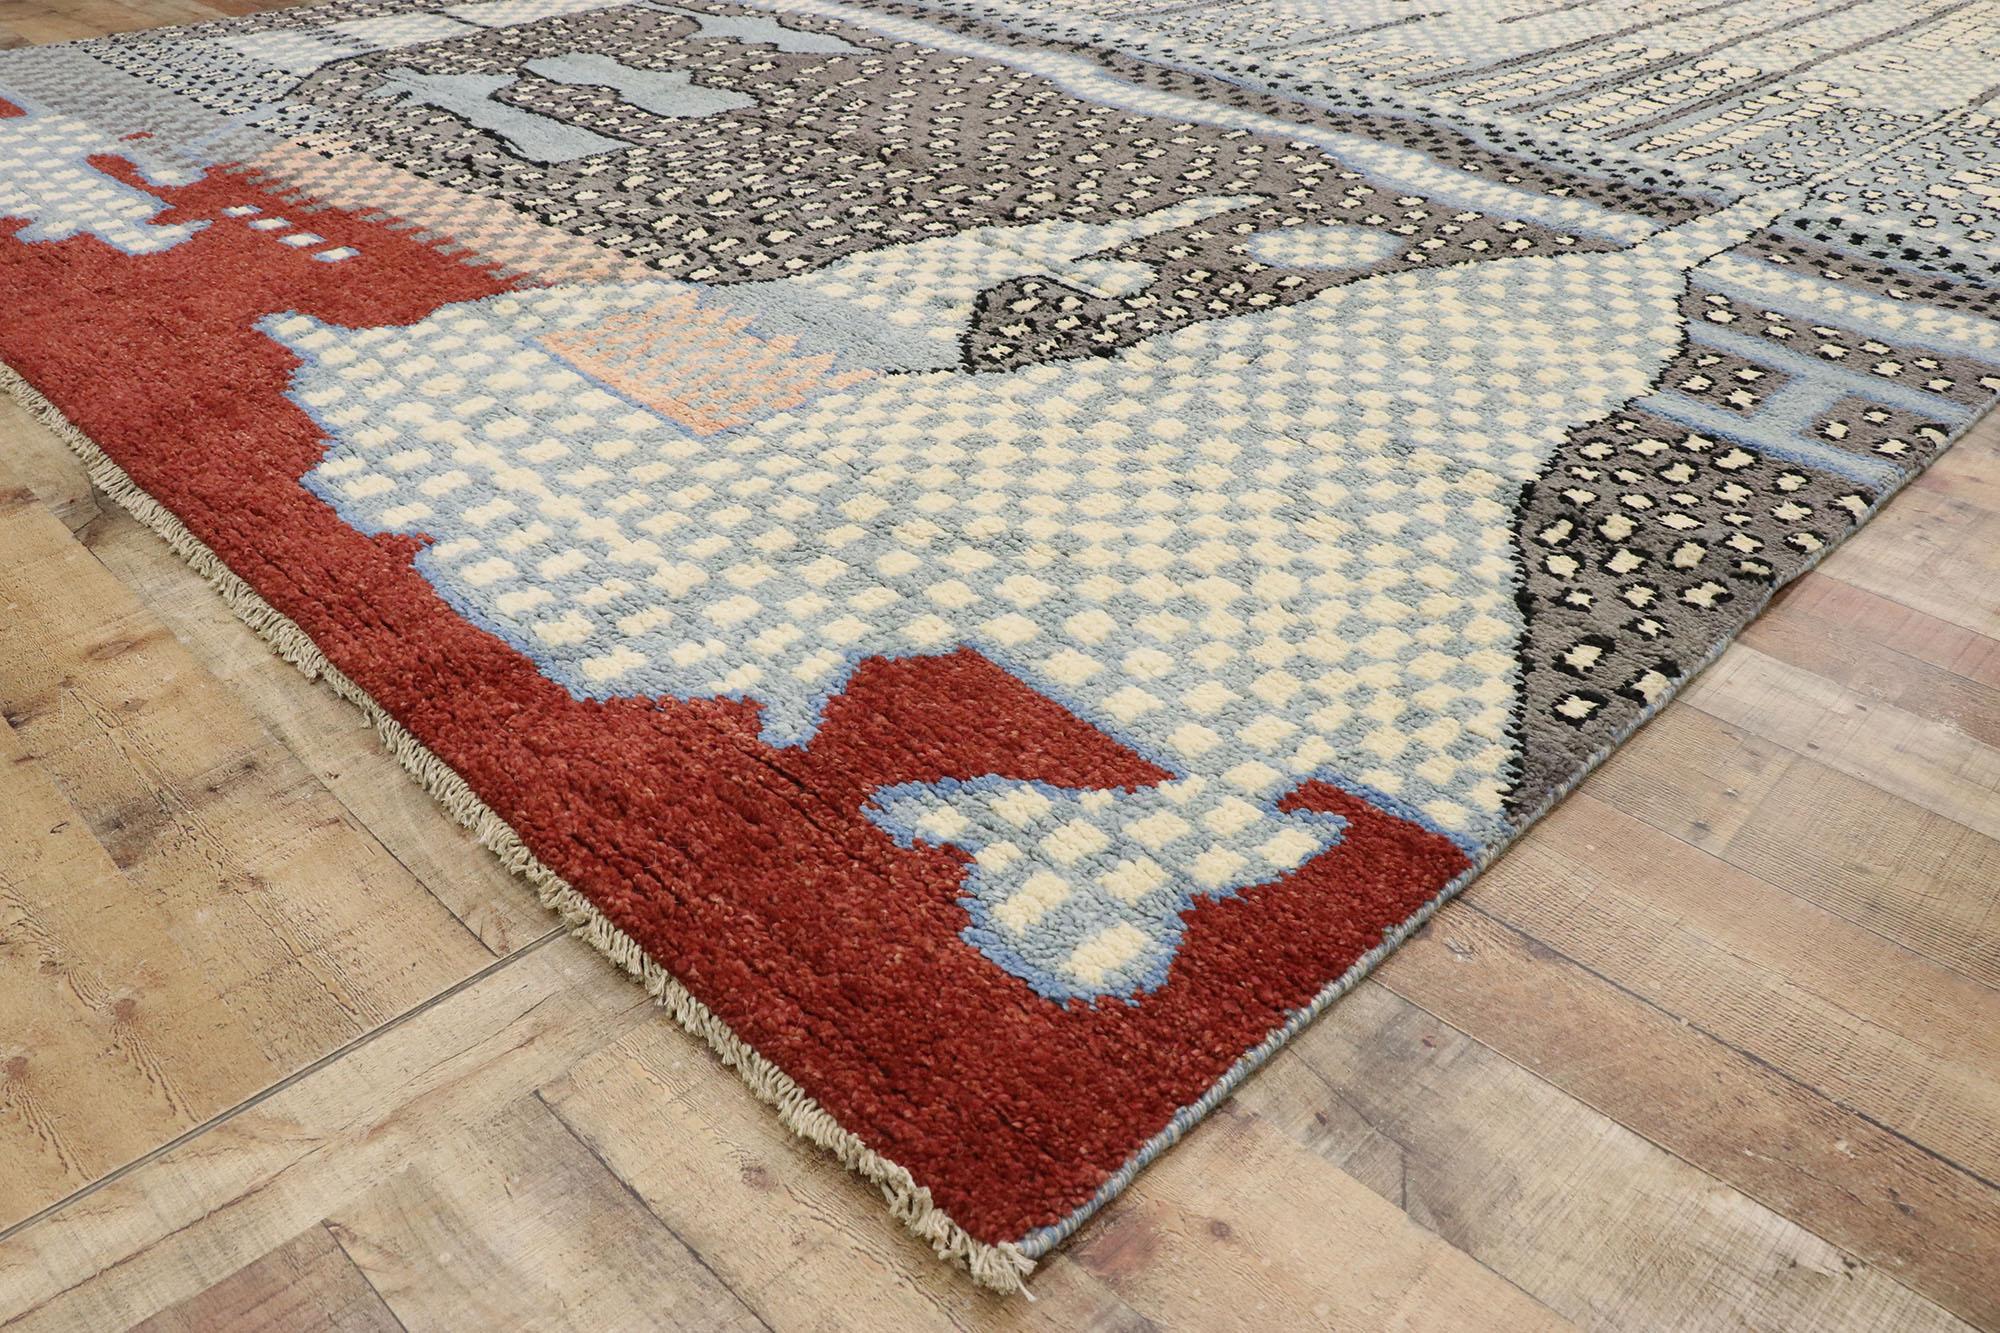 New Contemporary Moroccan Style Rug Inspired by Gunta Stolzl & Jasper Johns In New Condition For Sale In Dallas, TX